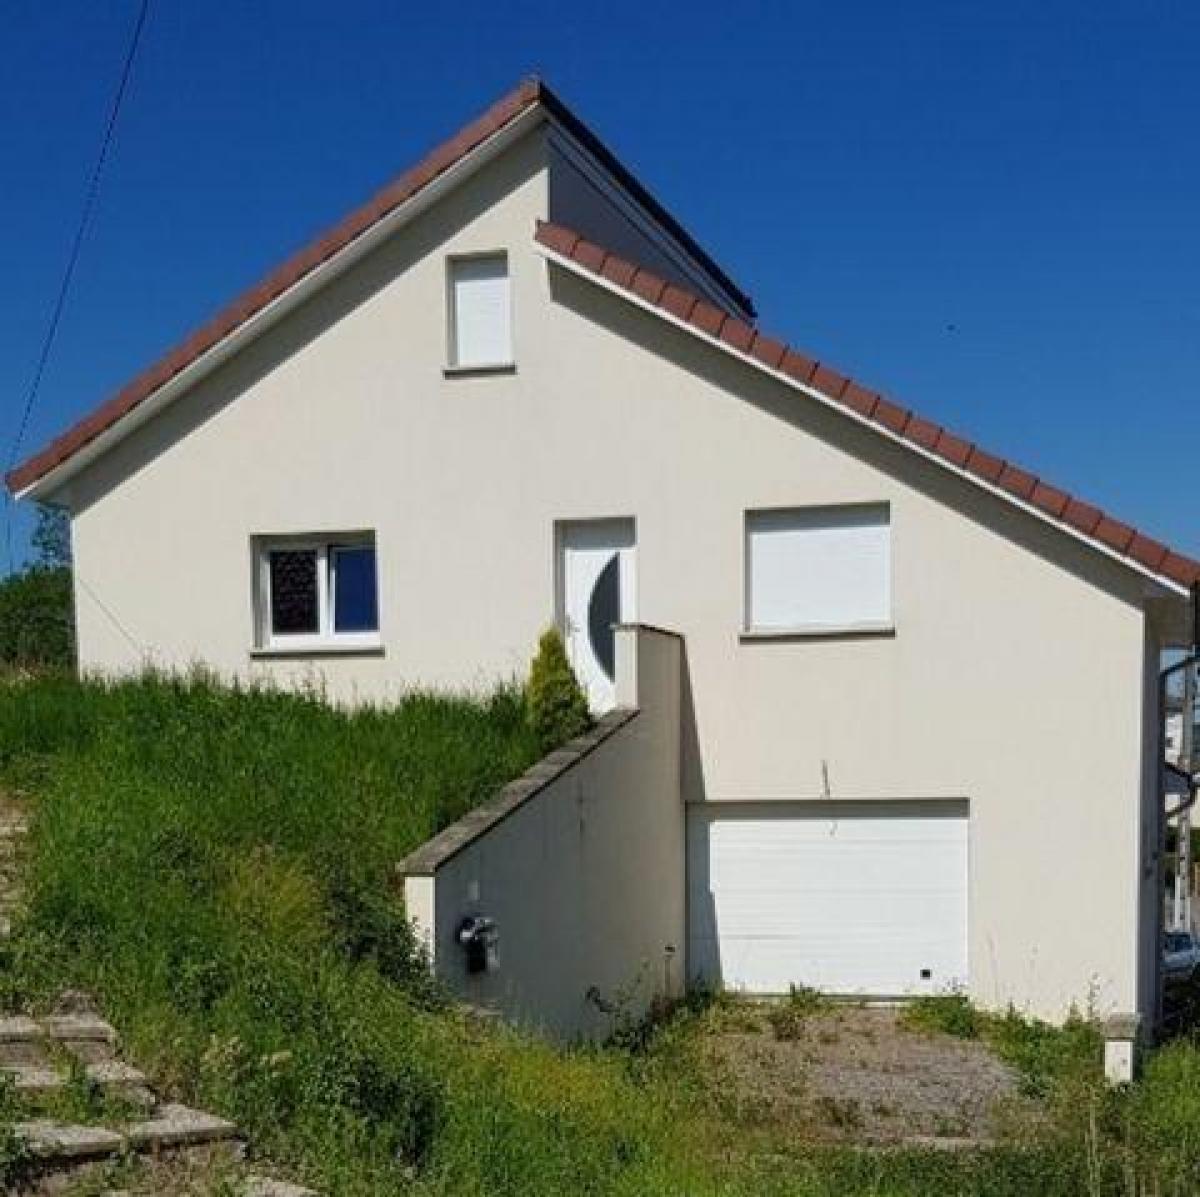 Picture of Home For Sale in Mirecourt, Lorraine, France